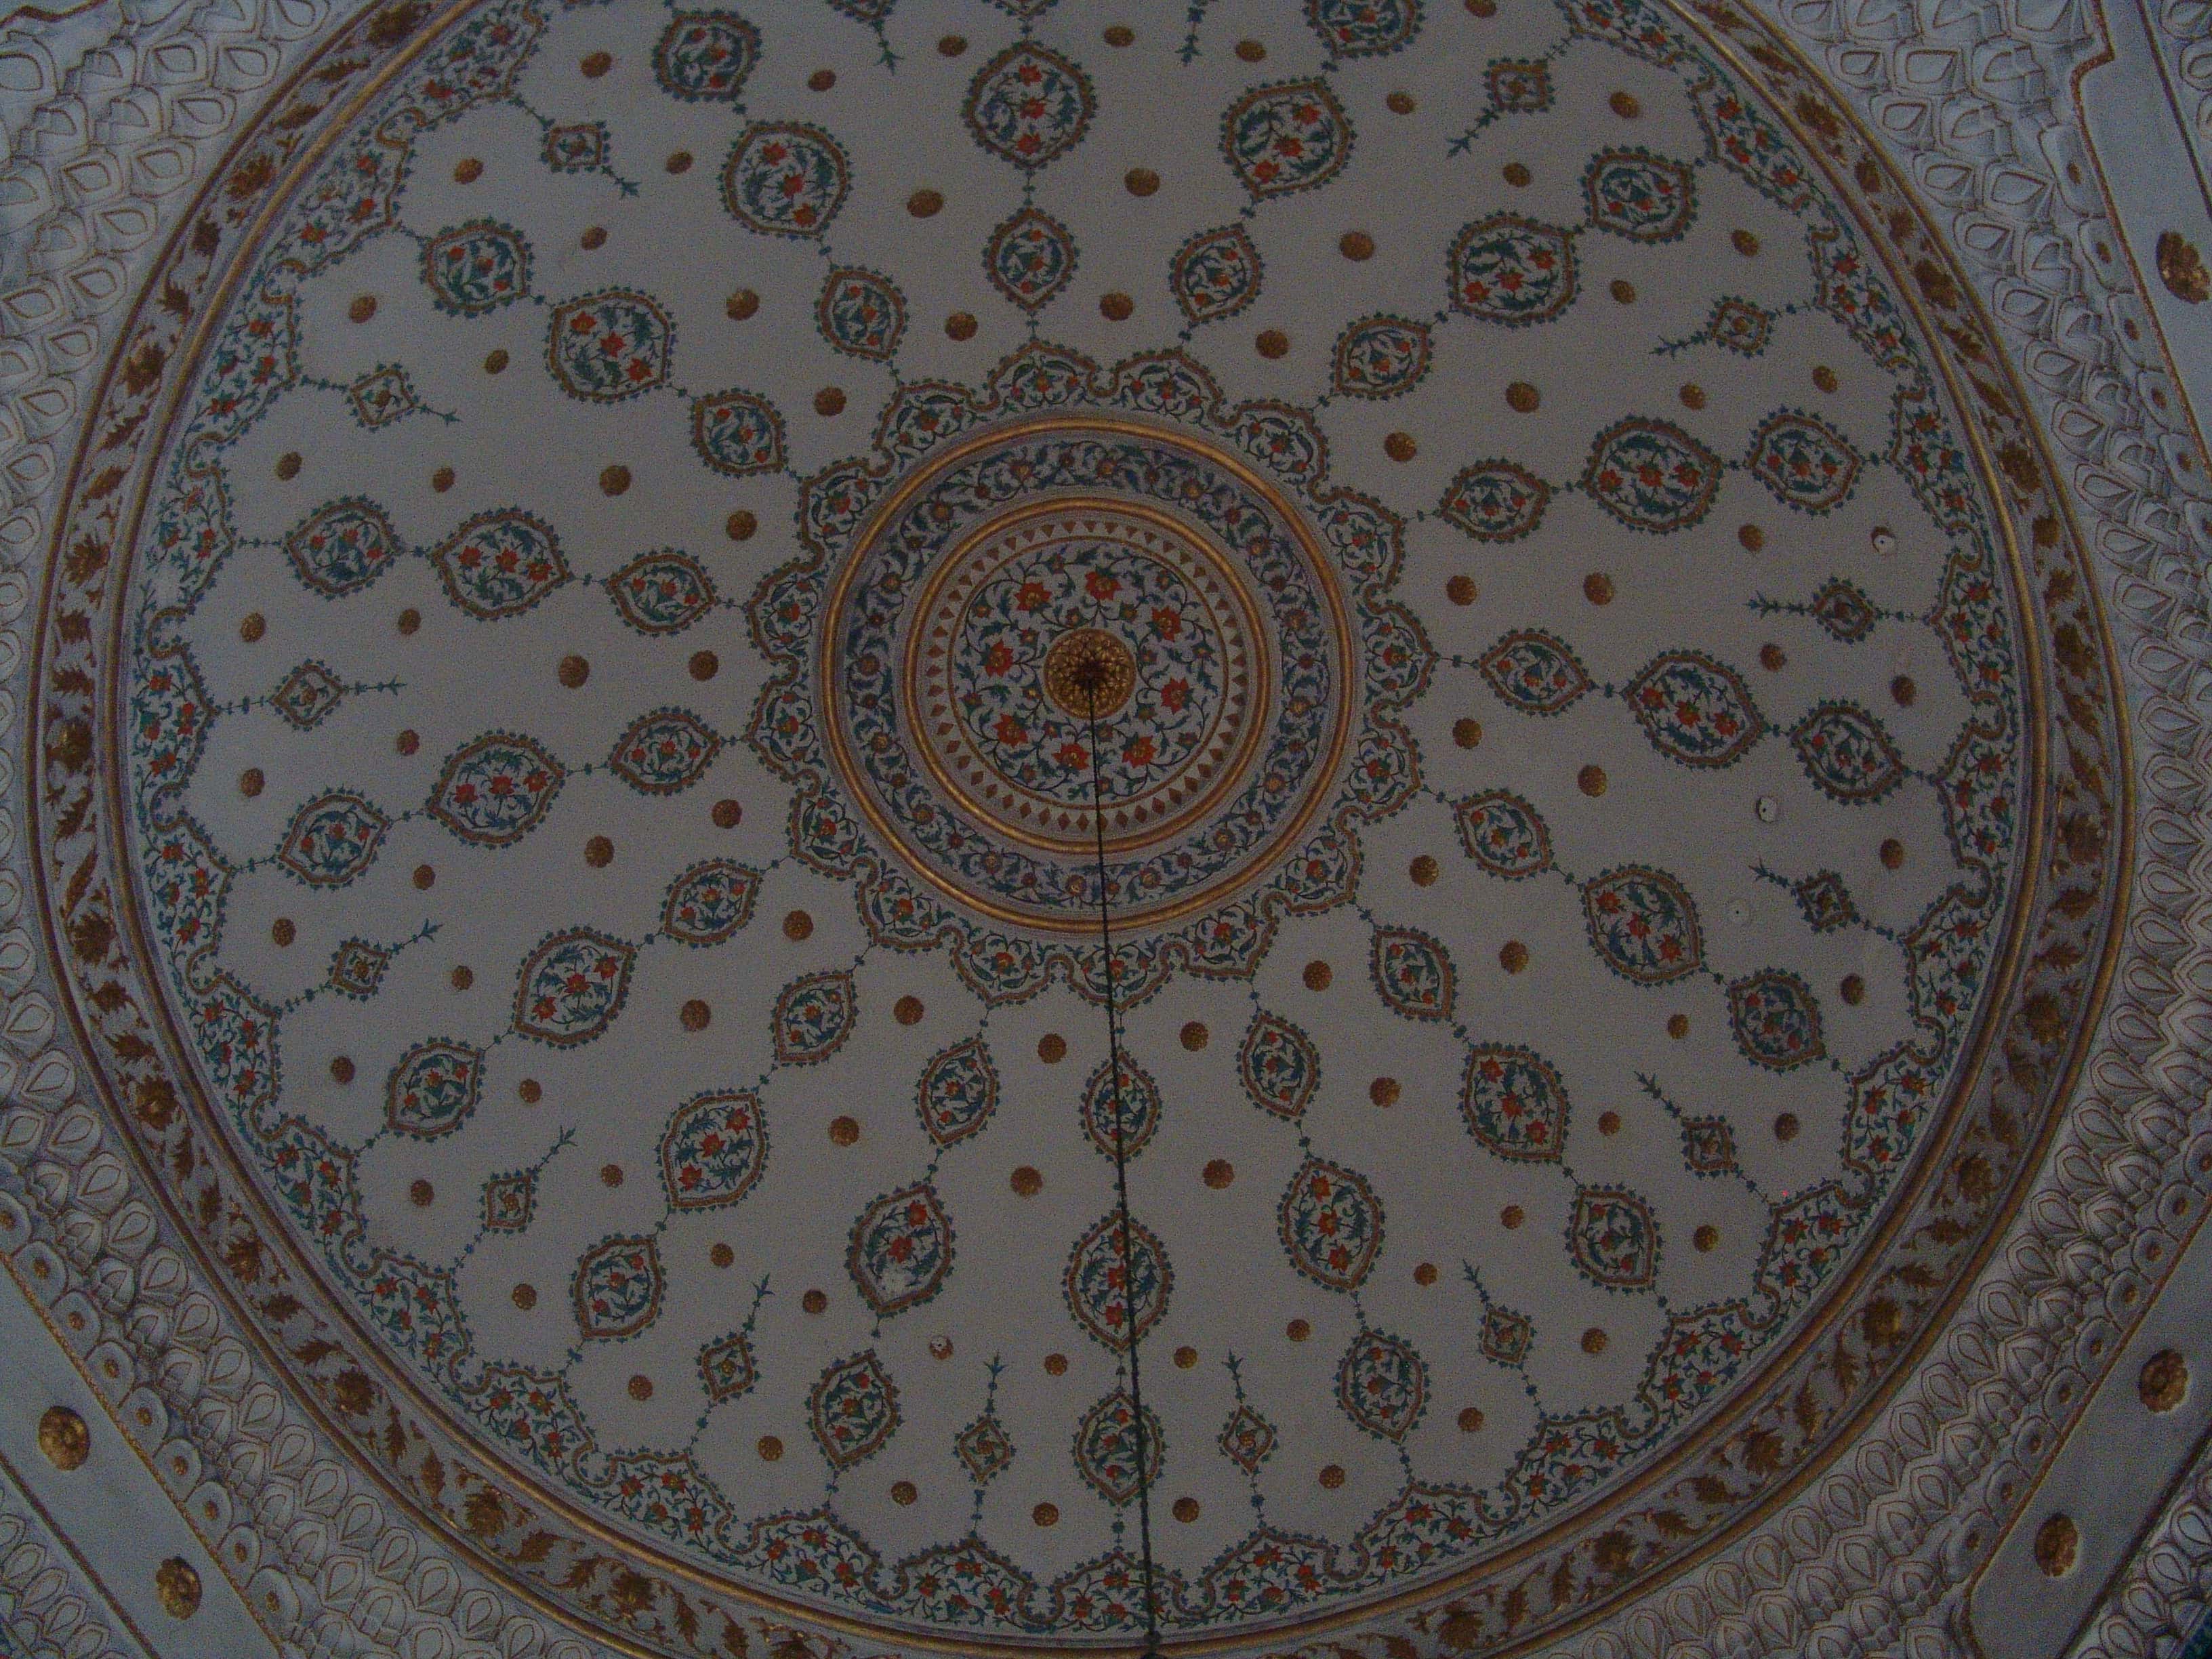 Dome of the Enderûn Library